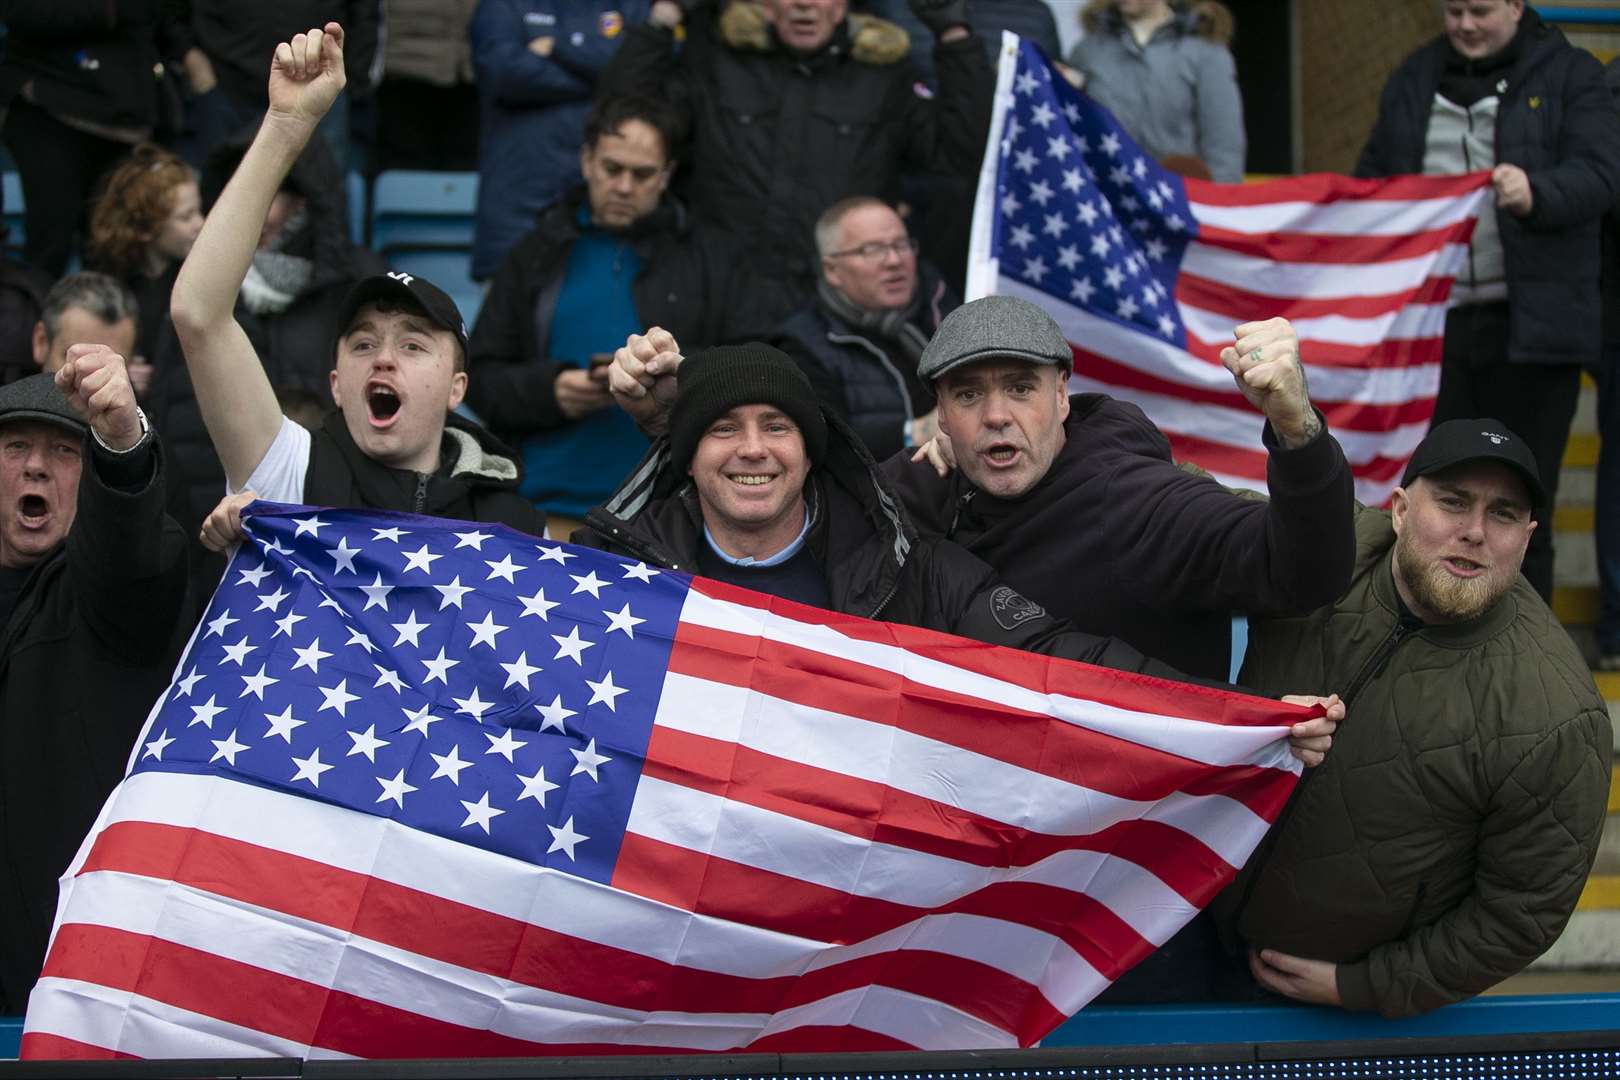 Gillingham fans supporting their new US owner